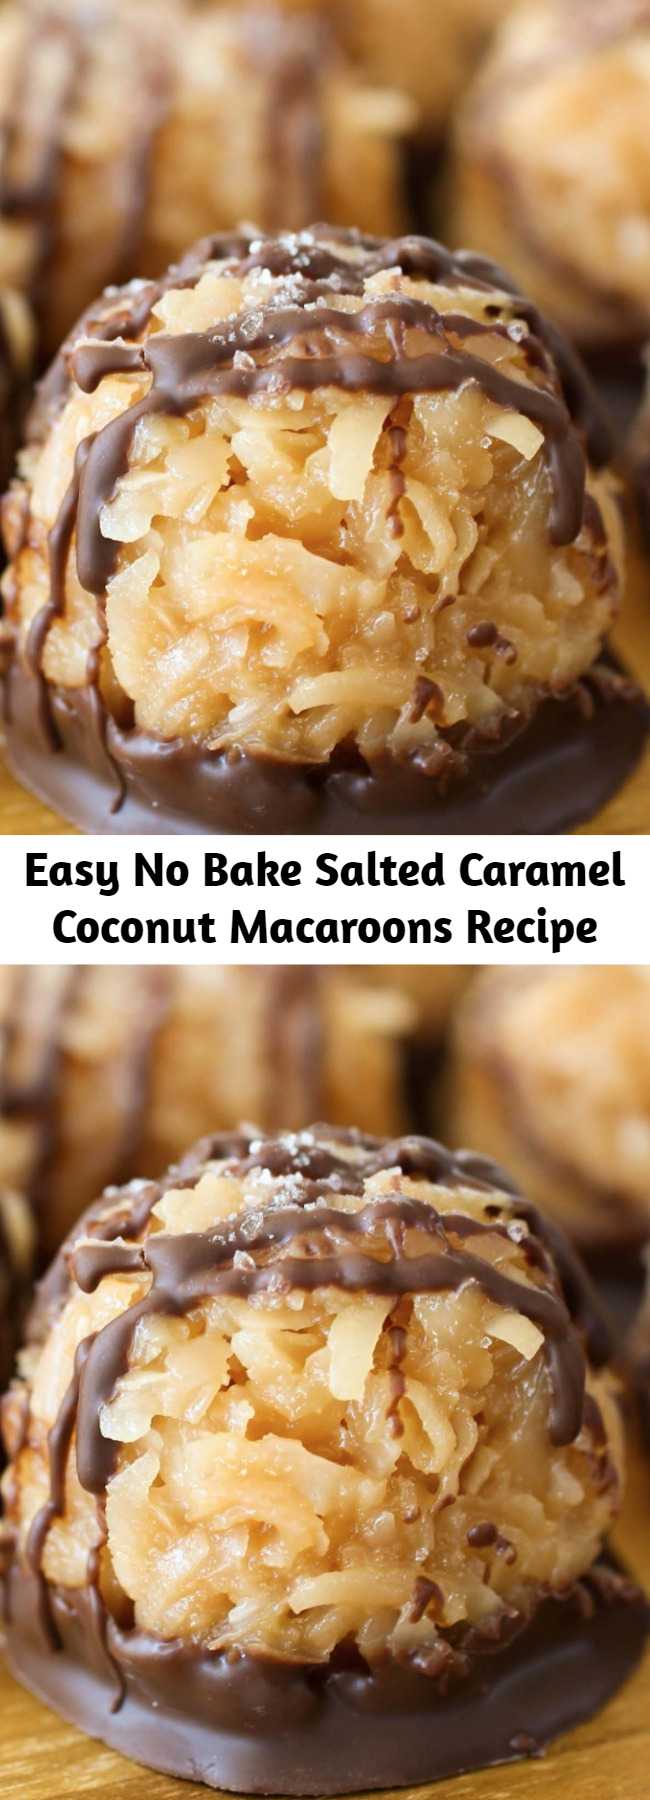 Easy No Bake Salted Caramel Coconut Macaroons Recipe - These No-Bake Salted Caramel Coconut Macaroons are so very easy that they may just become your go-to cookie recipe when you need something fast. Sweet coconut gets stirred into gooey caramel to form macaroons - then everything gets dipped and drizzled in chocolate. That's a lot of happiness to share!